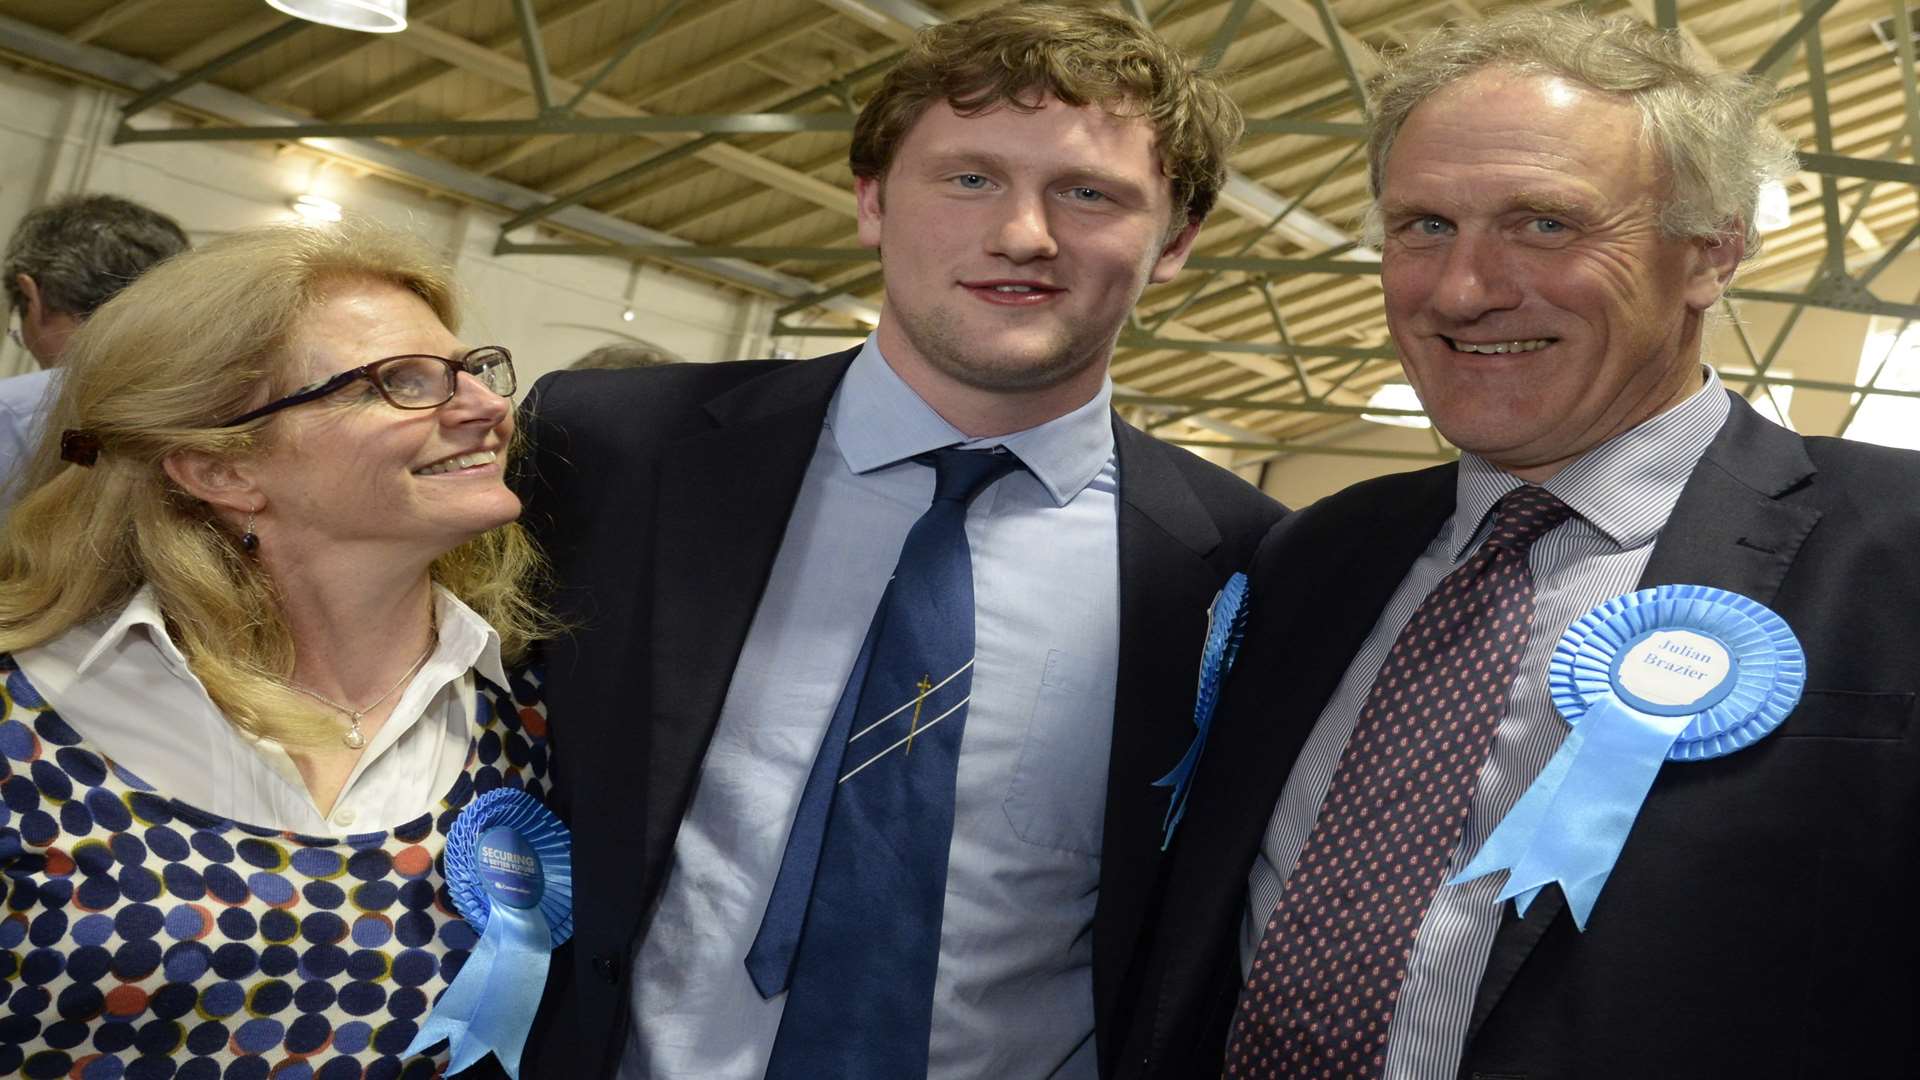 John Brazier (centre) with parents Kate and Sir Julian Brazier on the day of his election to the council in 2015.